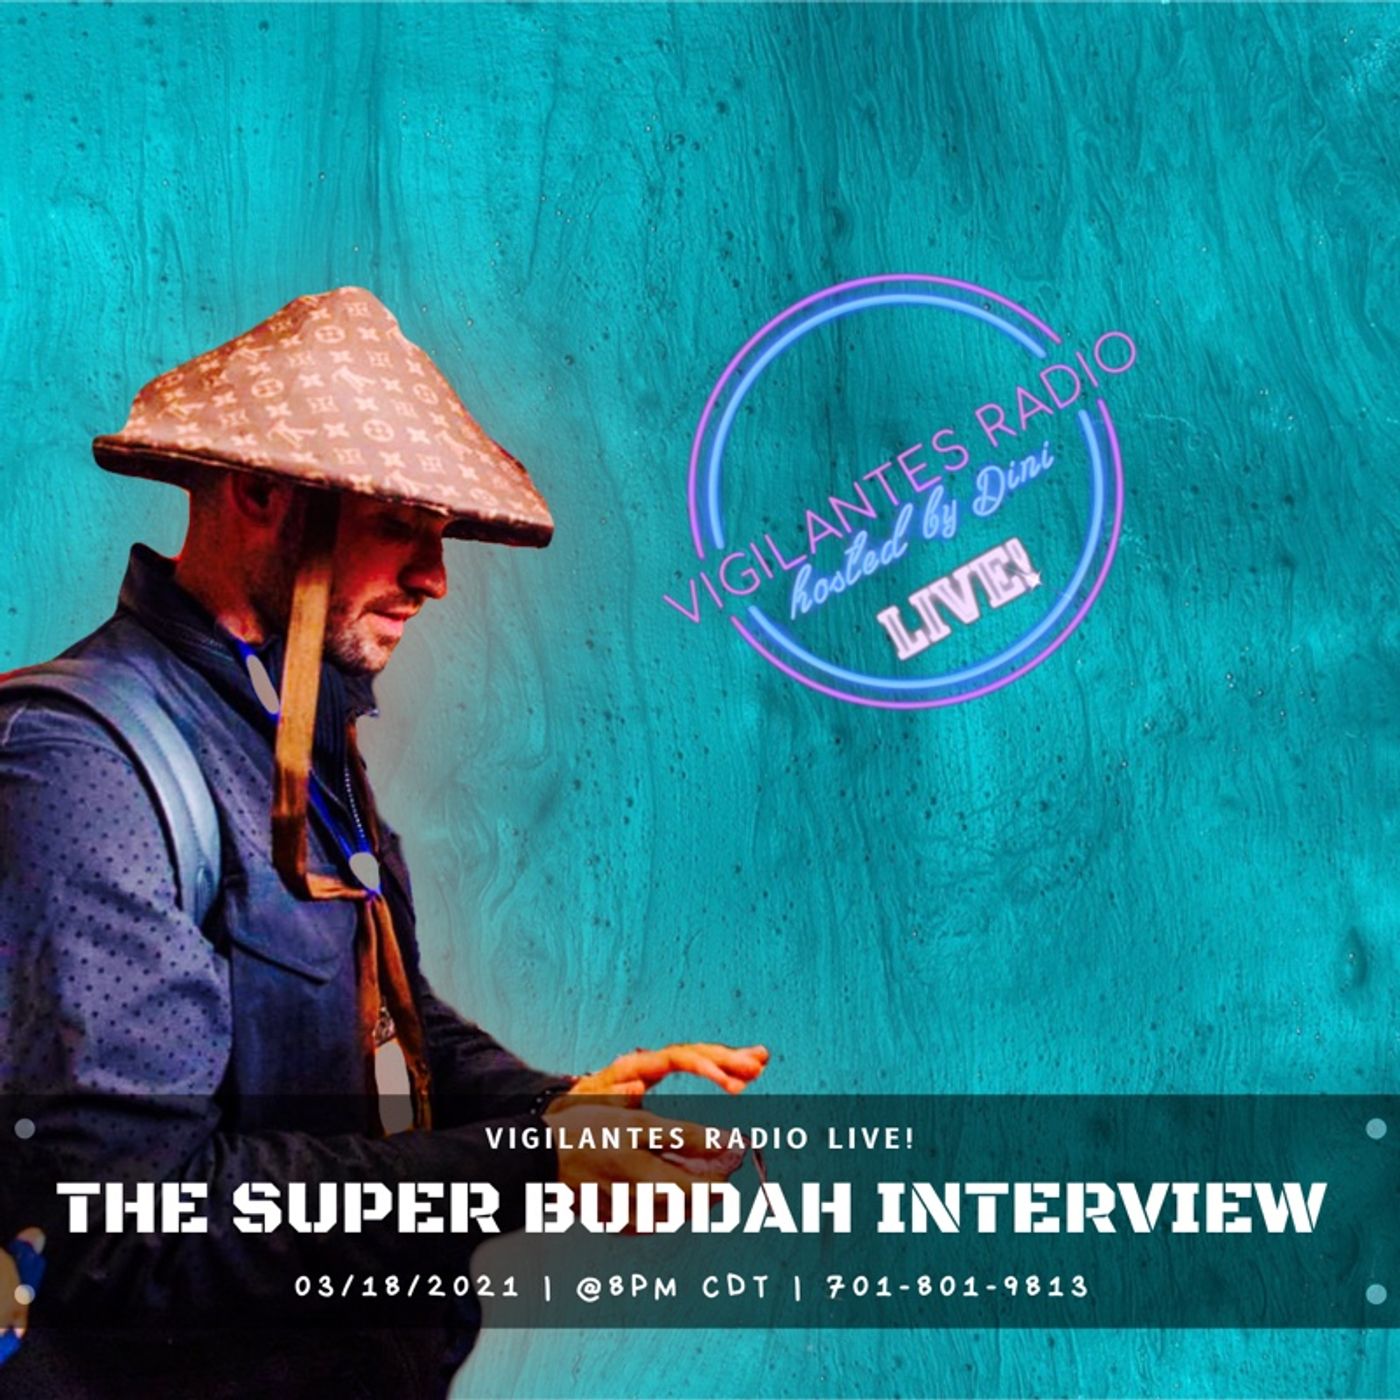 The Super Buddah Interview. Image